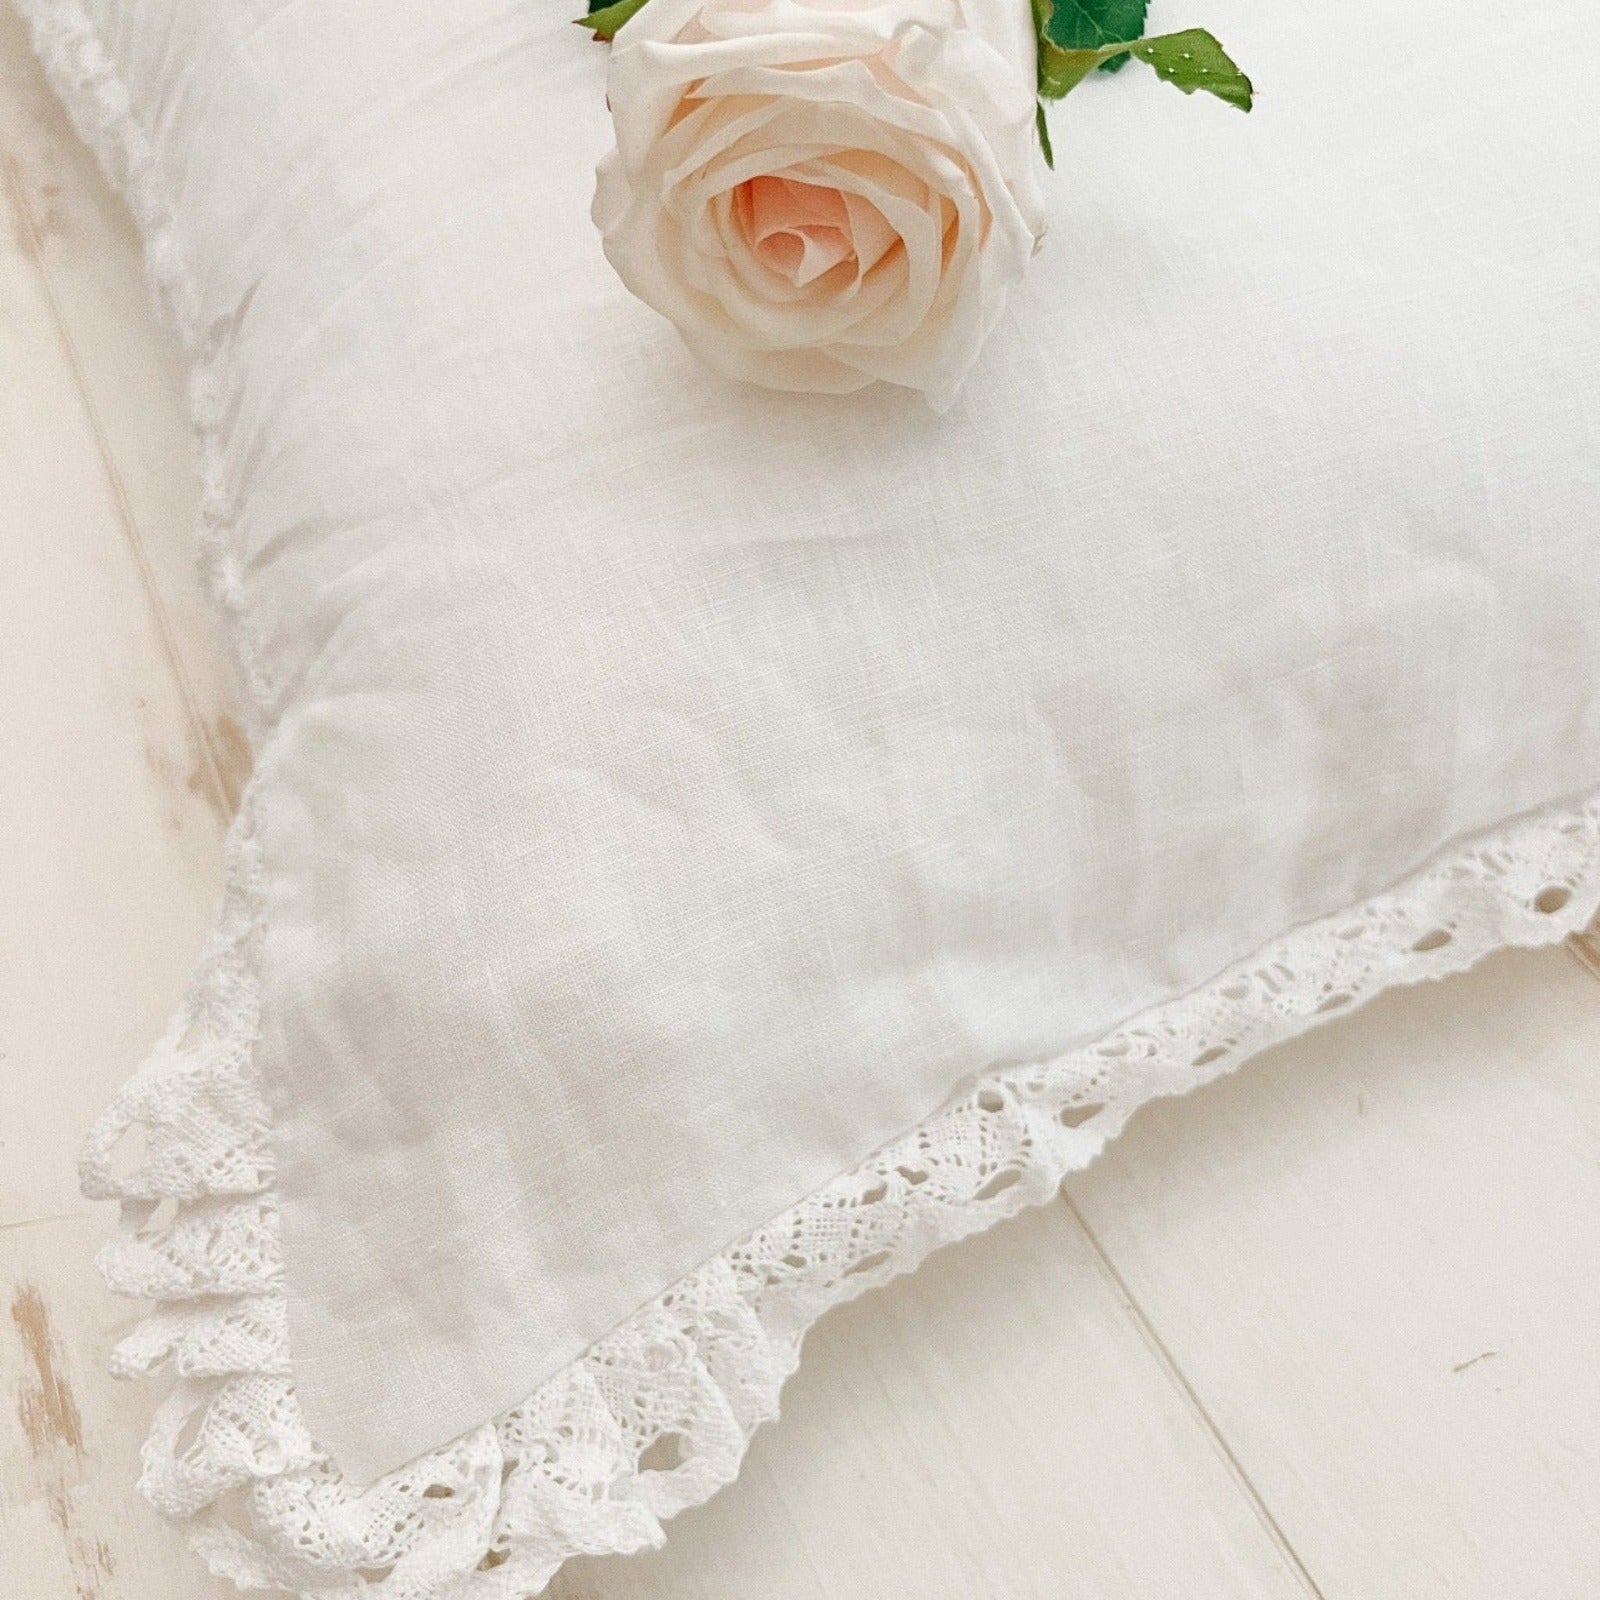 French Linen Crochet Lace Sham - Slightly Imperfect - Ivory Lane Home